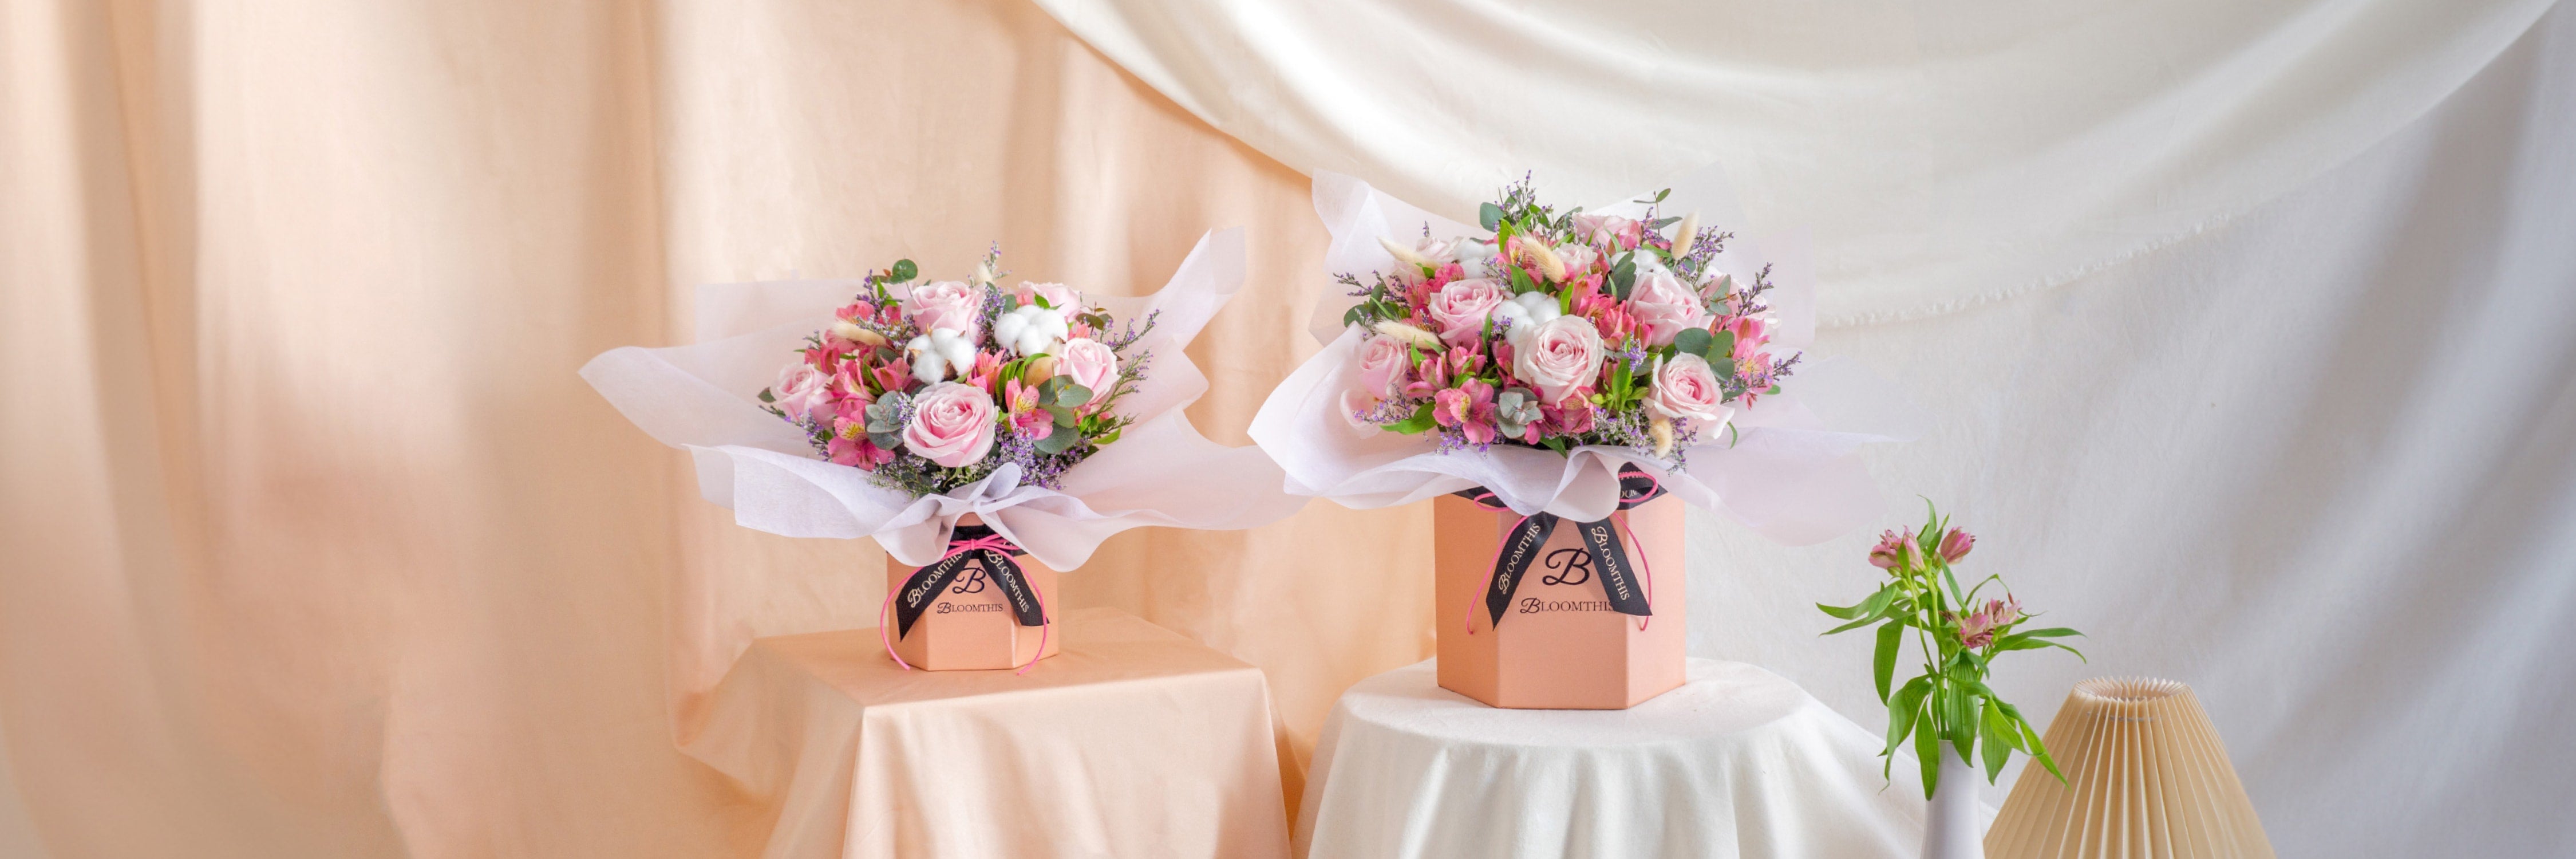 BloomThis Pink Day flowers & gifts